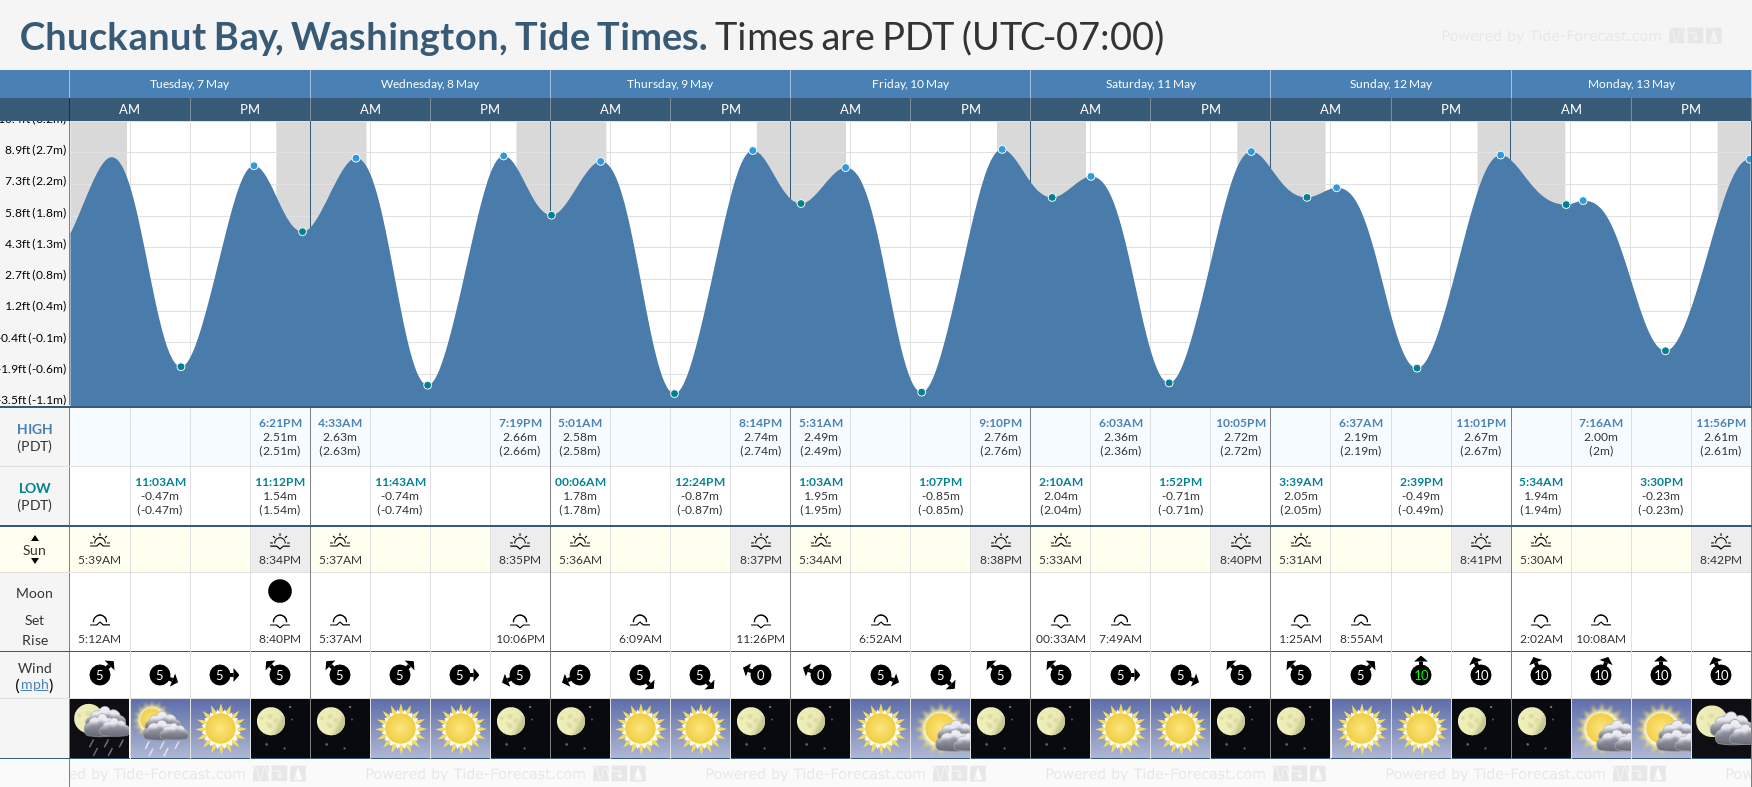 Chuckanut Bay, Washington Tide Chart including high and low tide tide times for the next 7 days